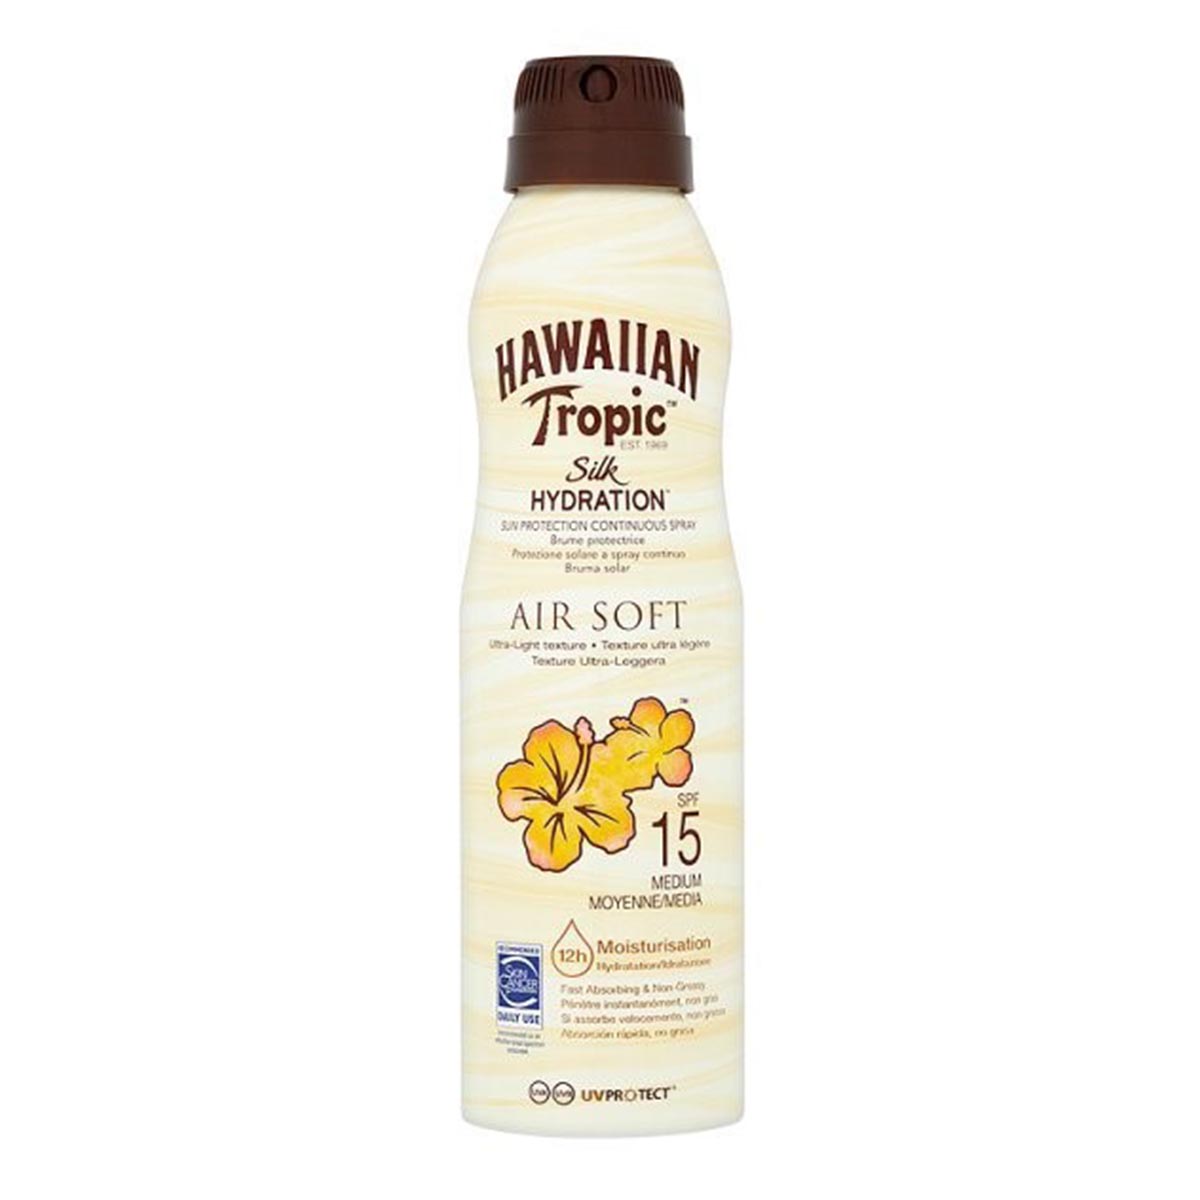 Image of Hawaiian Tropic Silk Hydration Air Soft Protezione Solaire A Spray Continuo Spf15 177ml